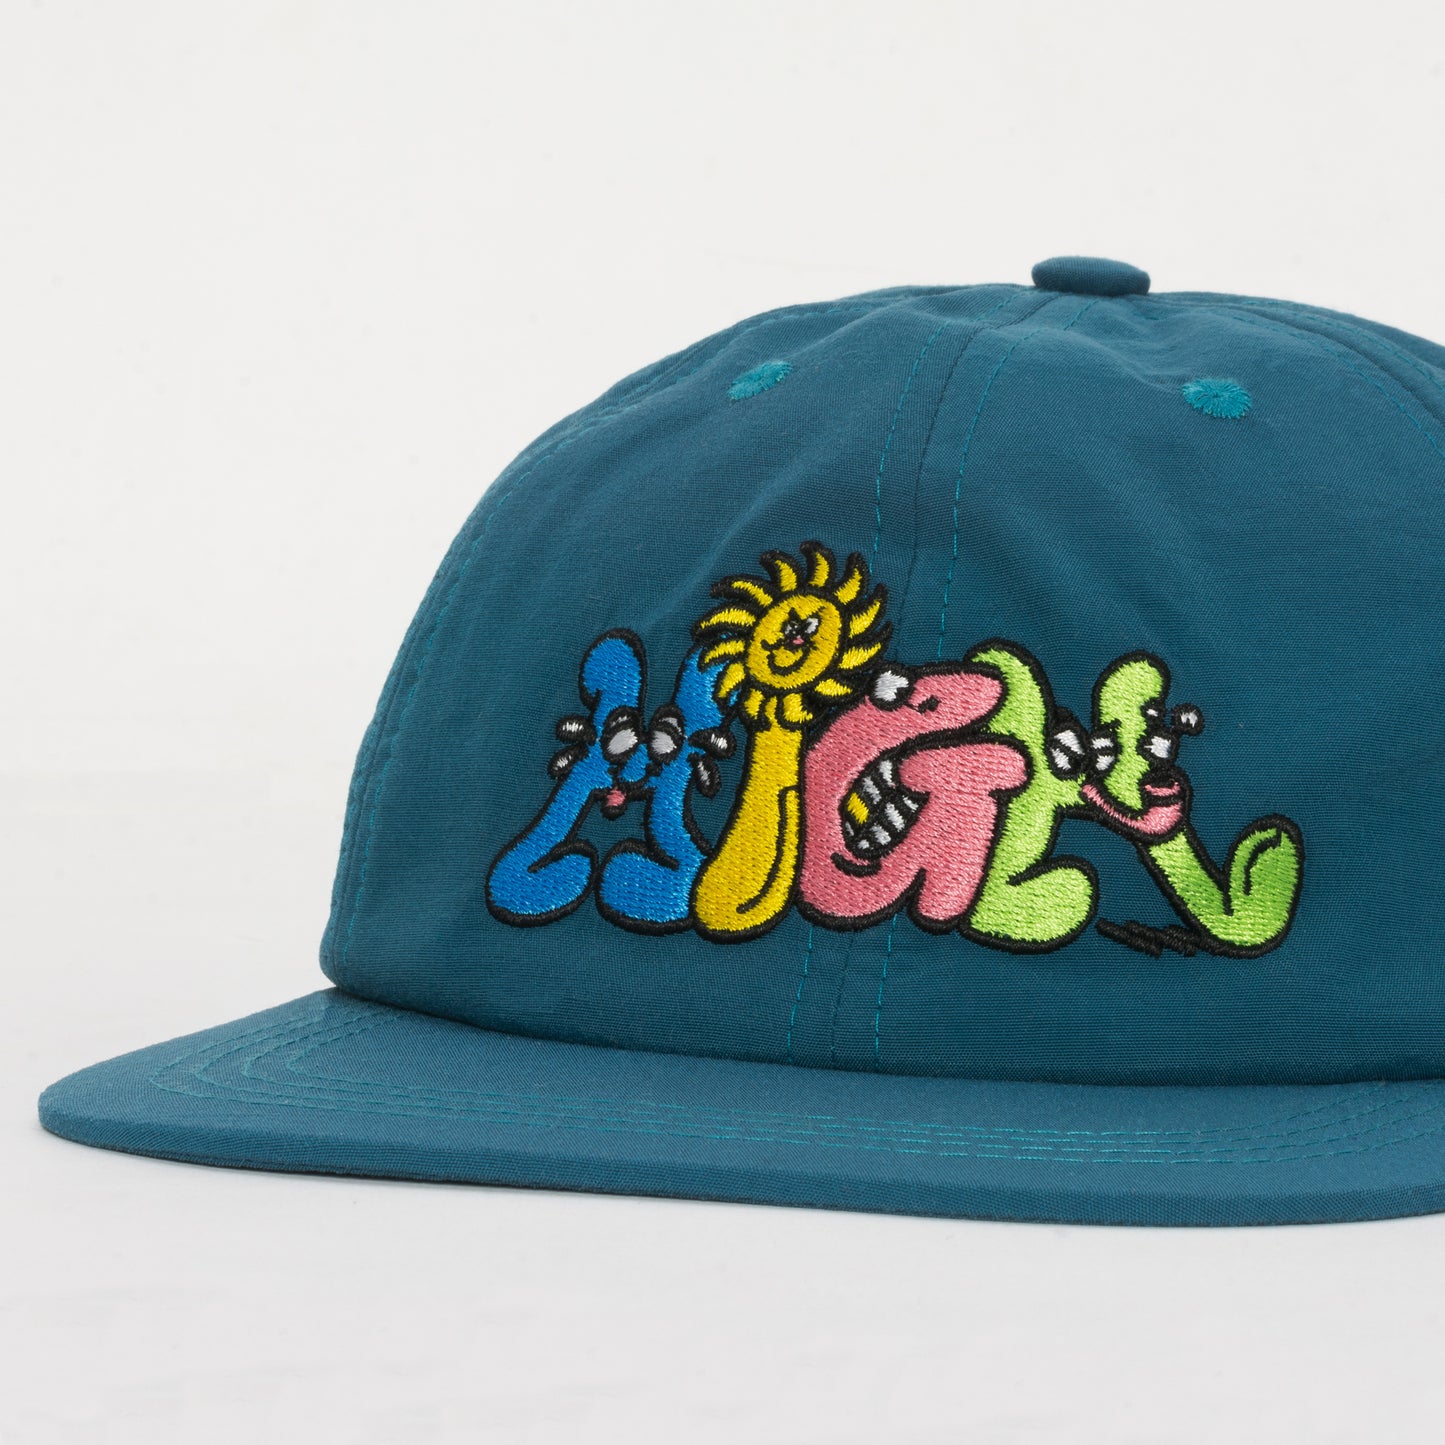 HIGH - 6 Panel Goofy "Oil Blue" - THE GAME